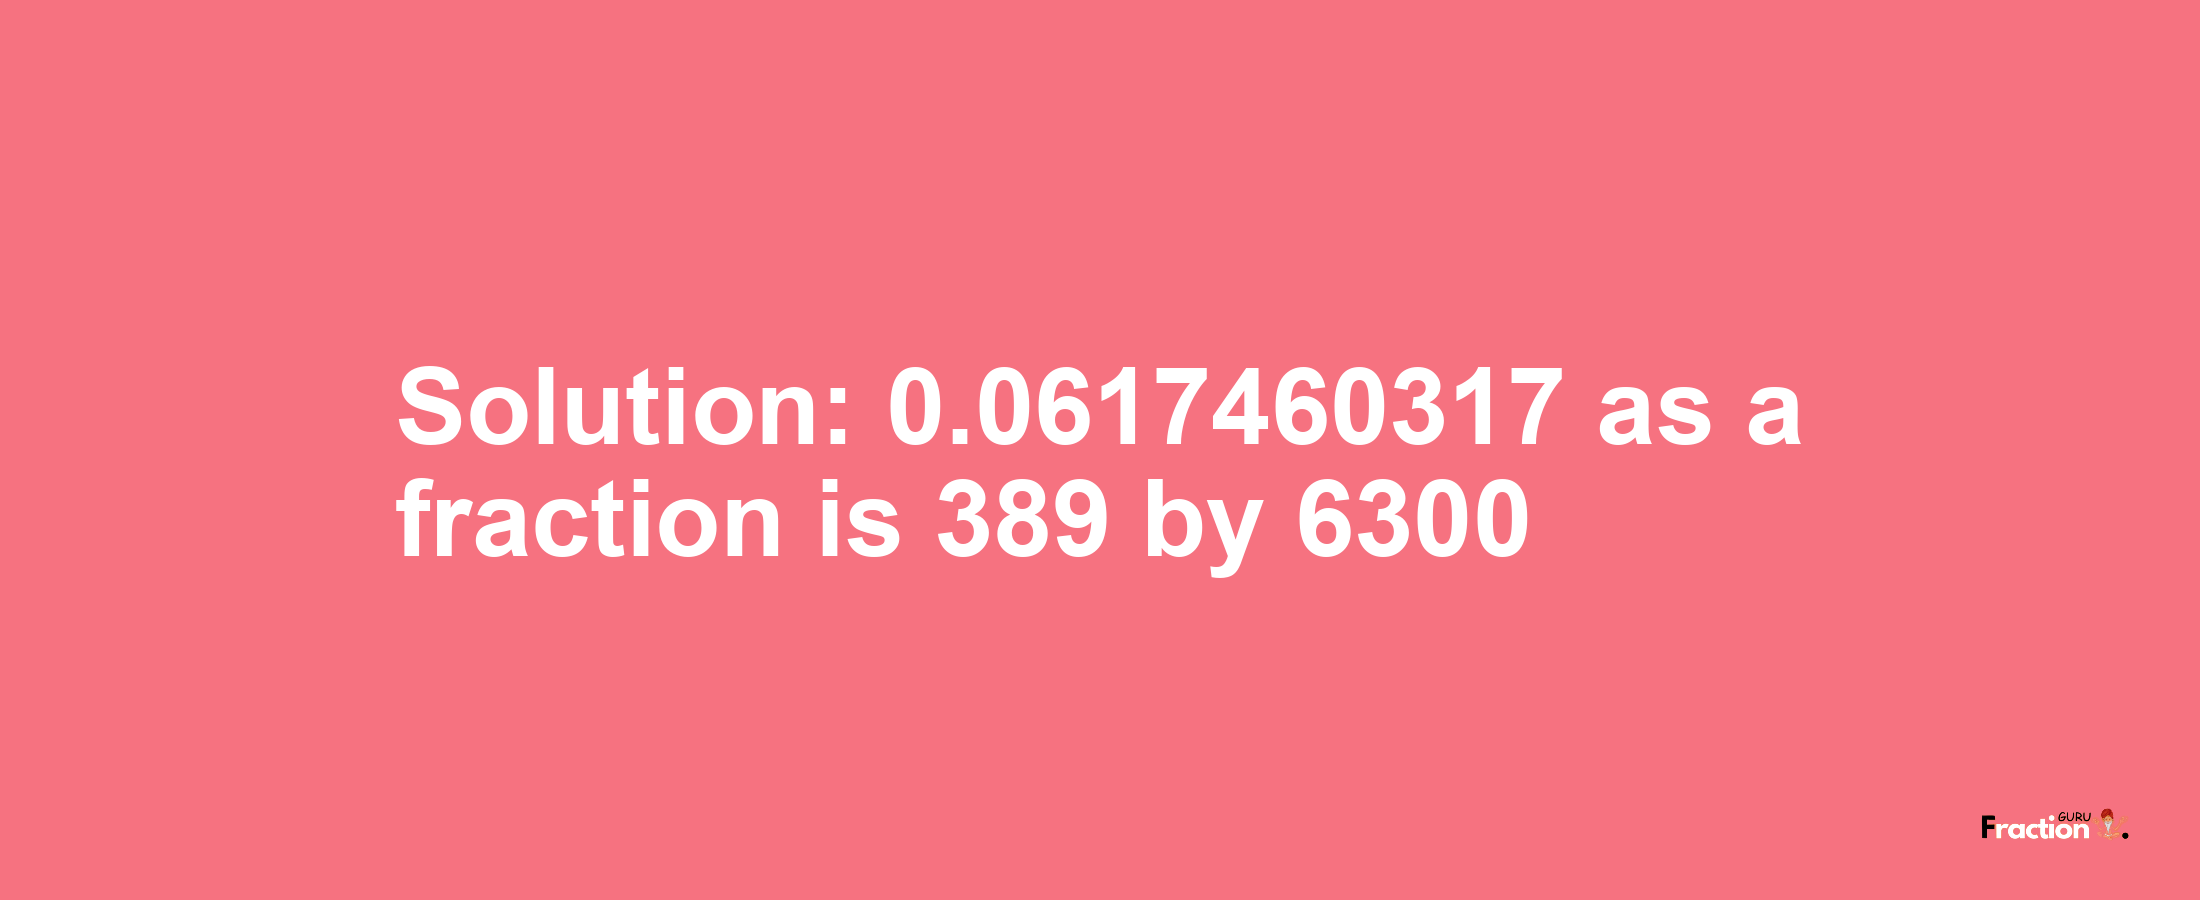 Solution:0.0617460317 as a fraction is 389/6300